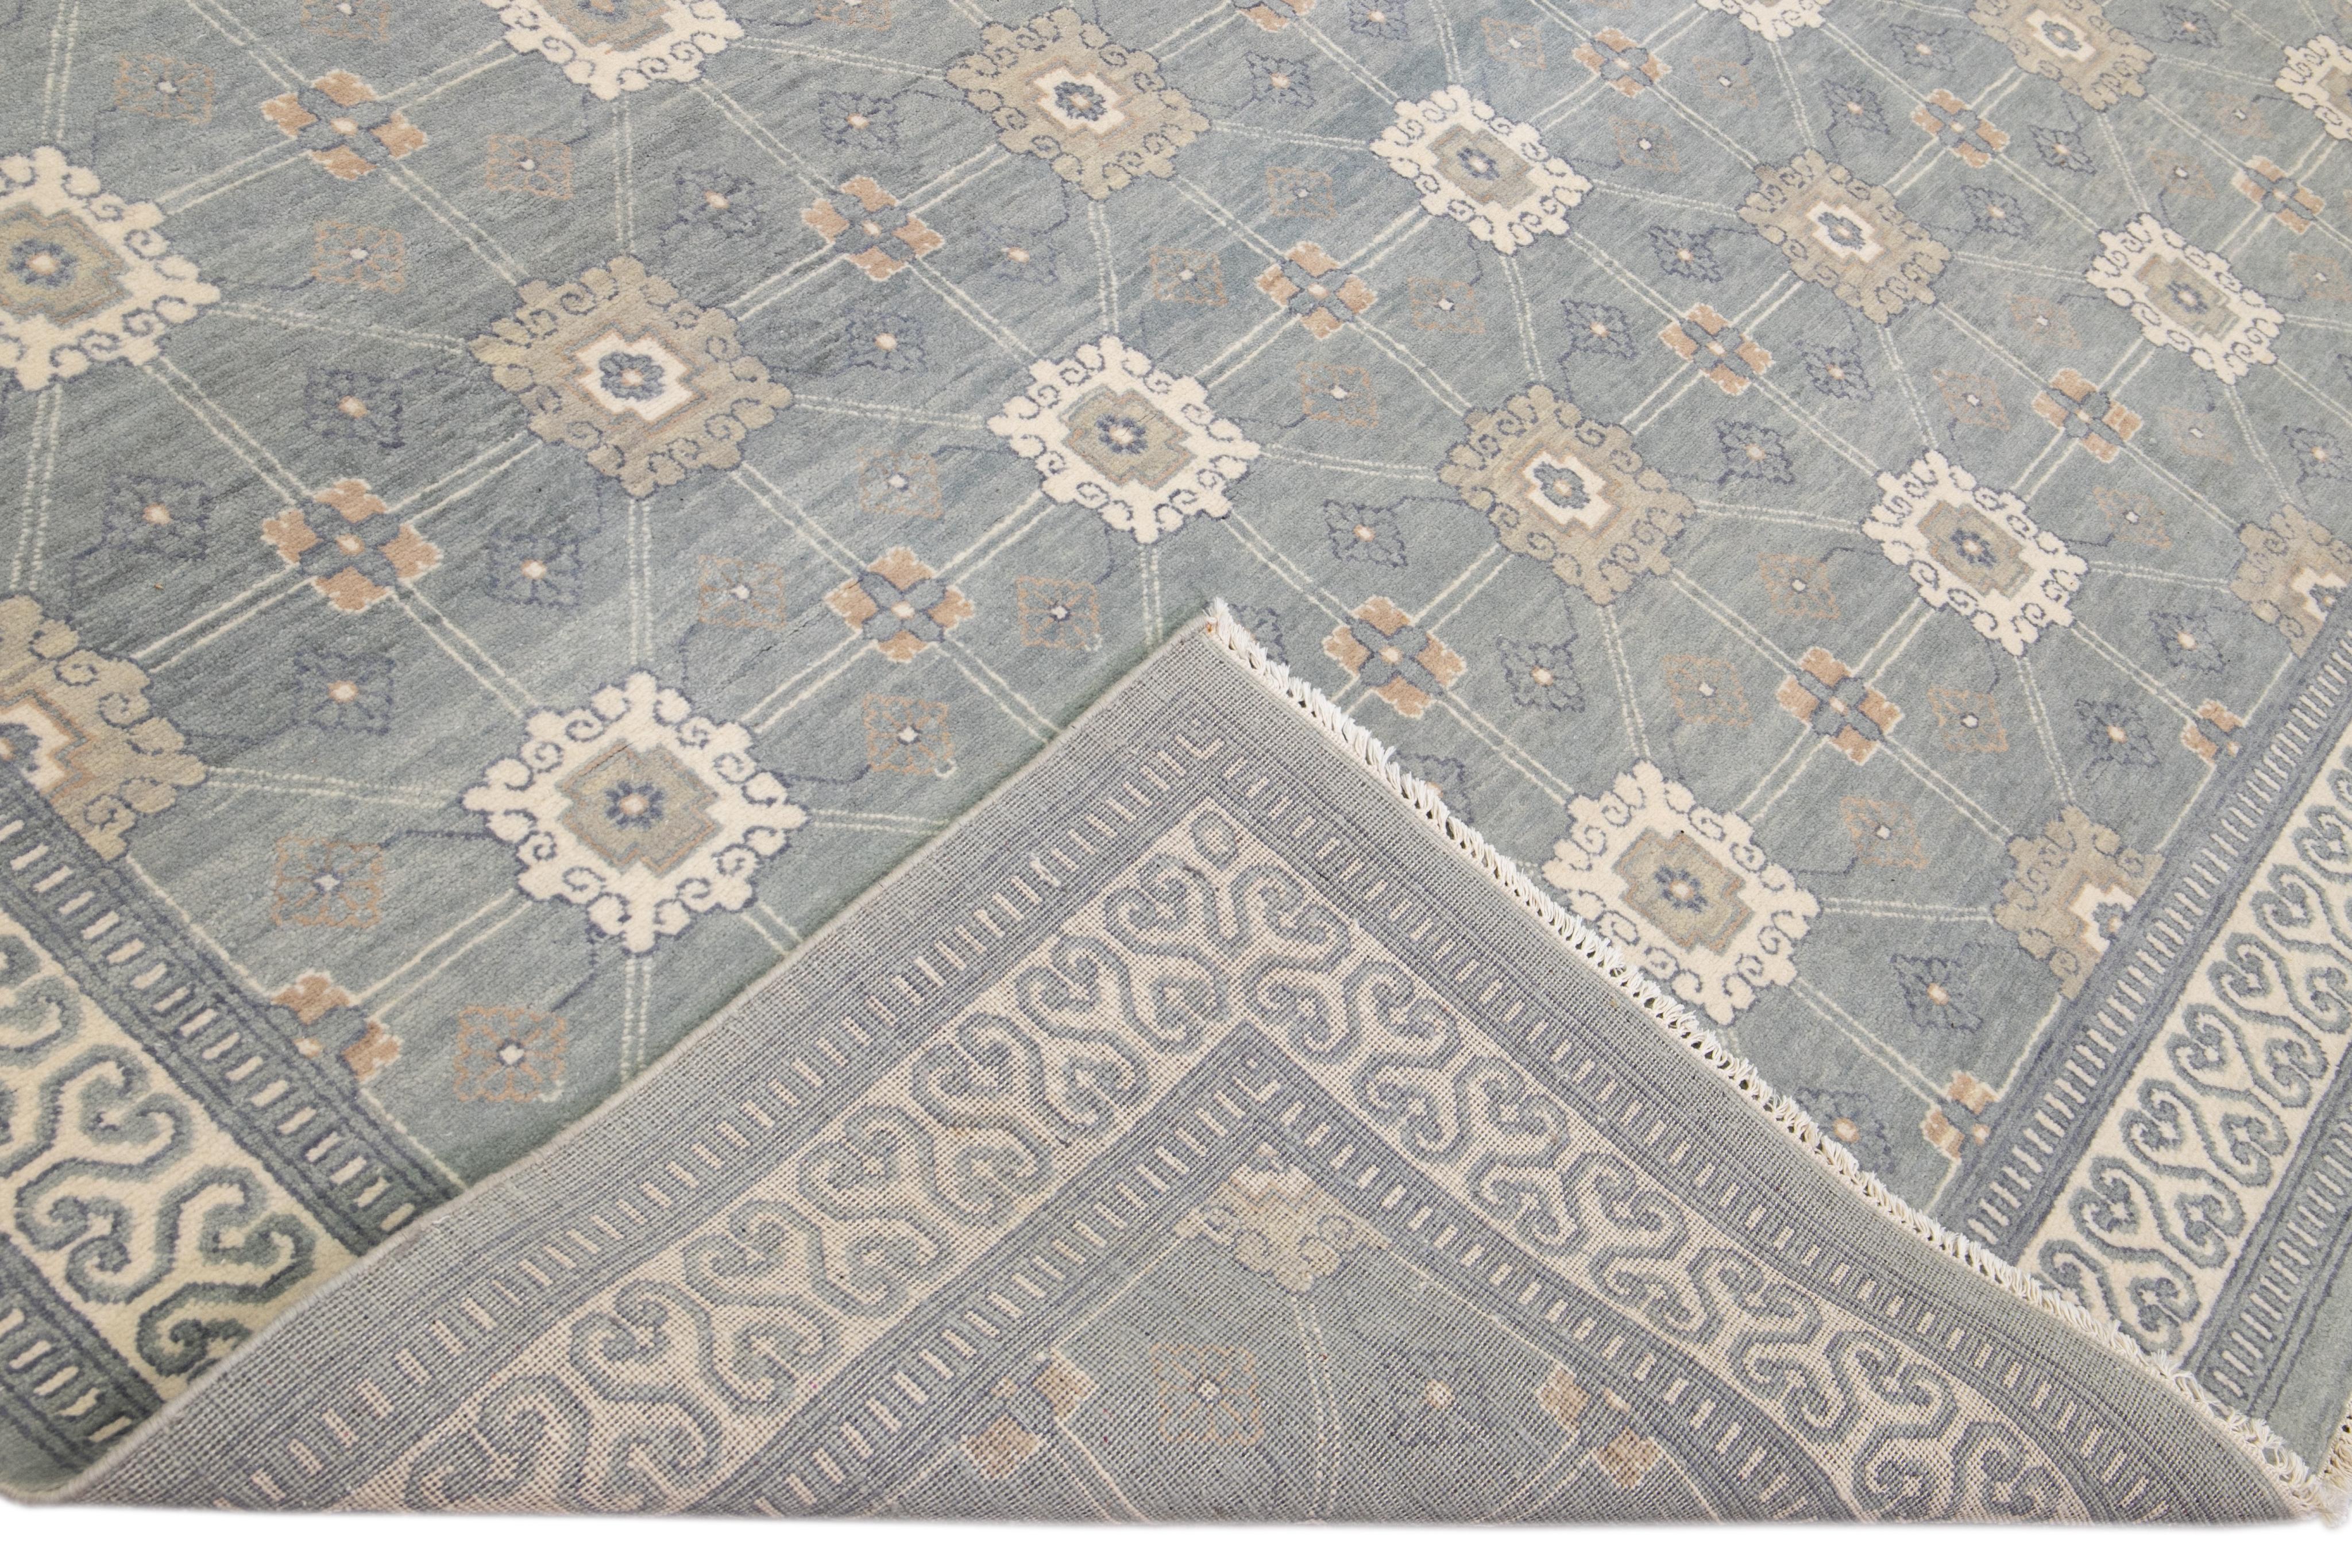 Beautiful Modern Khotan style hand-knotted wool gray field. This Khotan-style rug has a beautifully designed frame and accent of ivory, beige, and blue in a gorgeous all-over geometric floral design.

This rug measures 11' 10